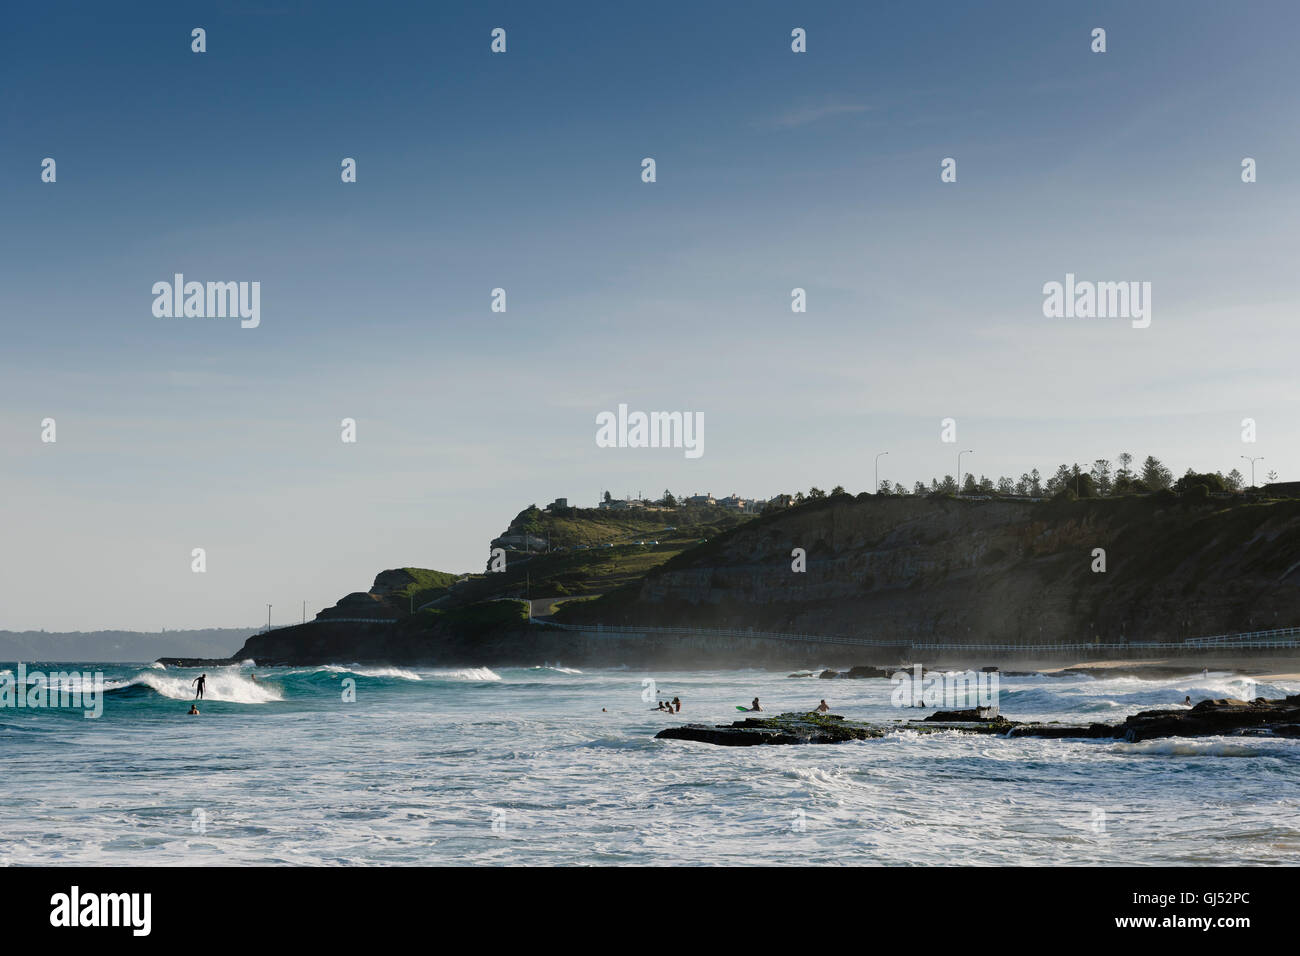 People surfing at Newcastle Beach, New South Wales, Australia. Stock Photo